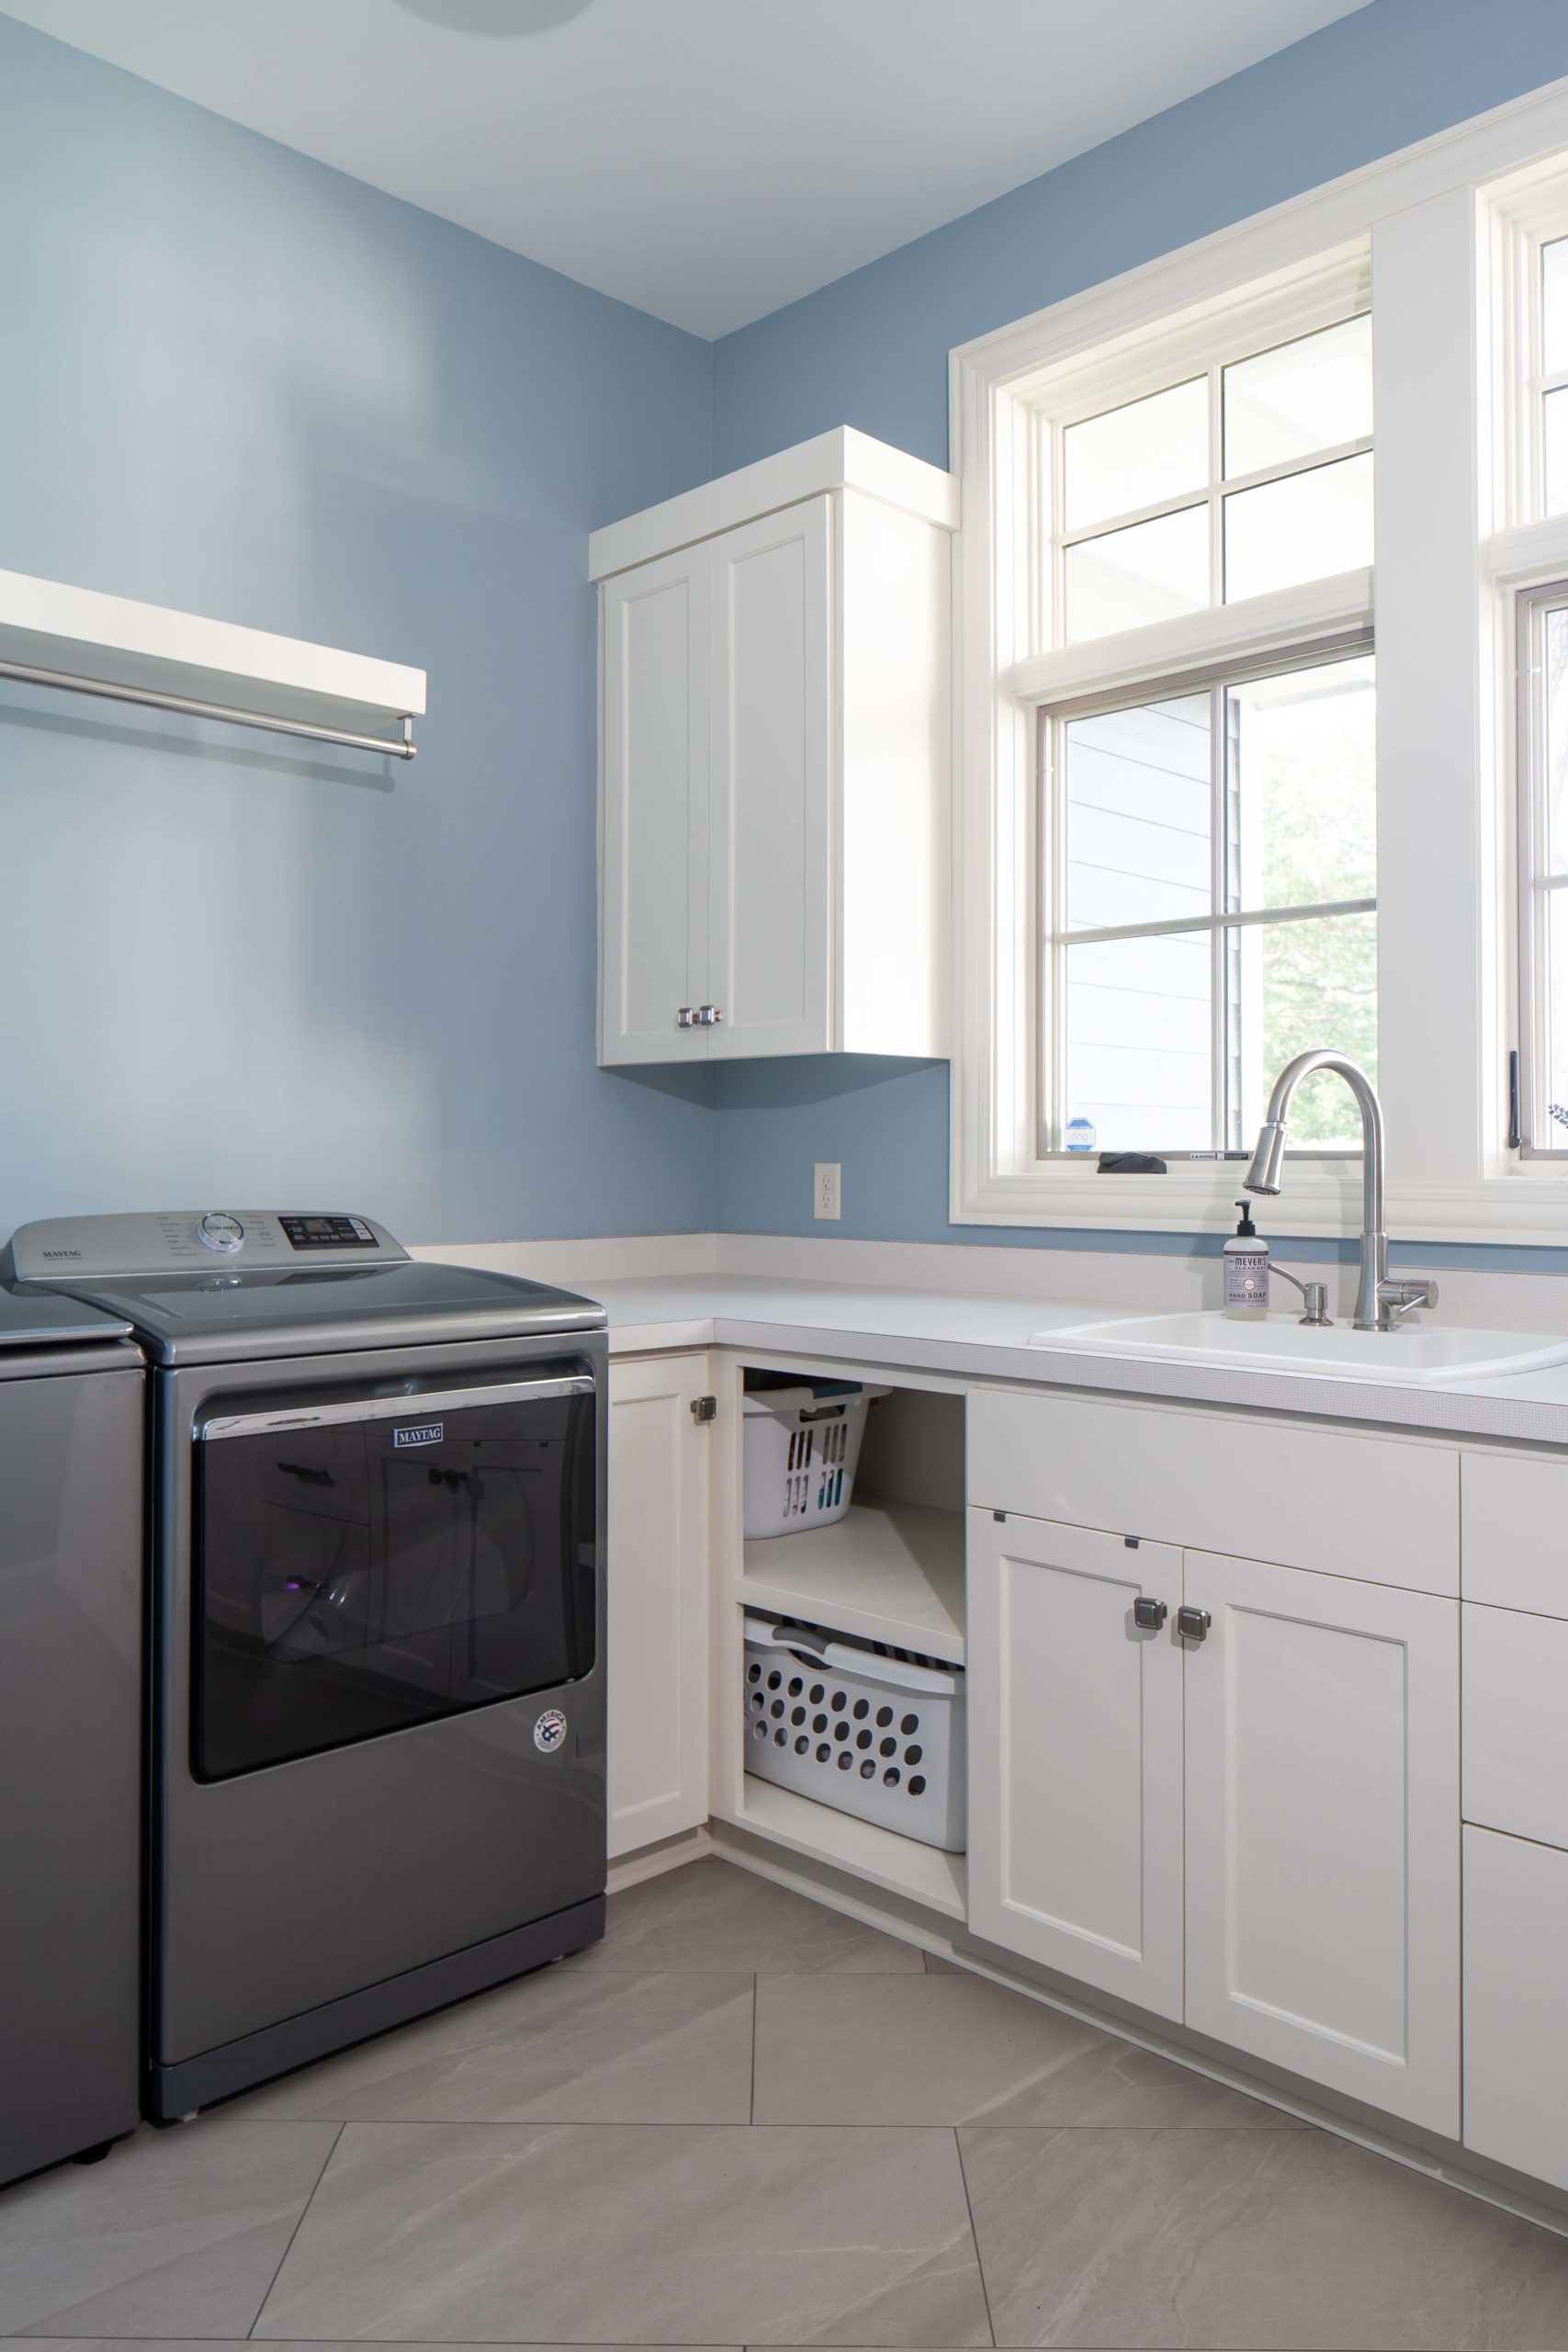 A laundry room on White Oak Lane equipped with a washer and dryer.